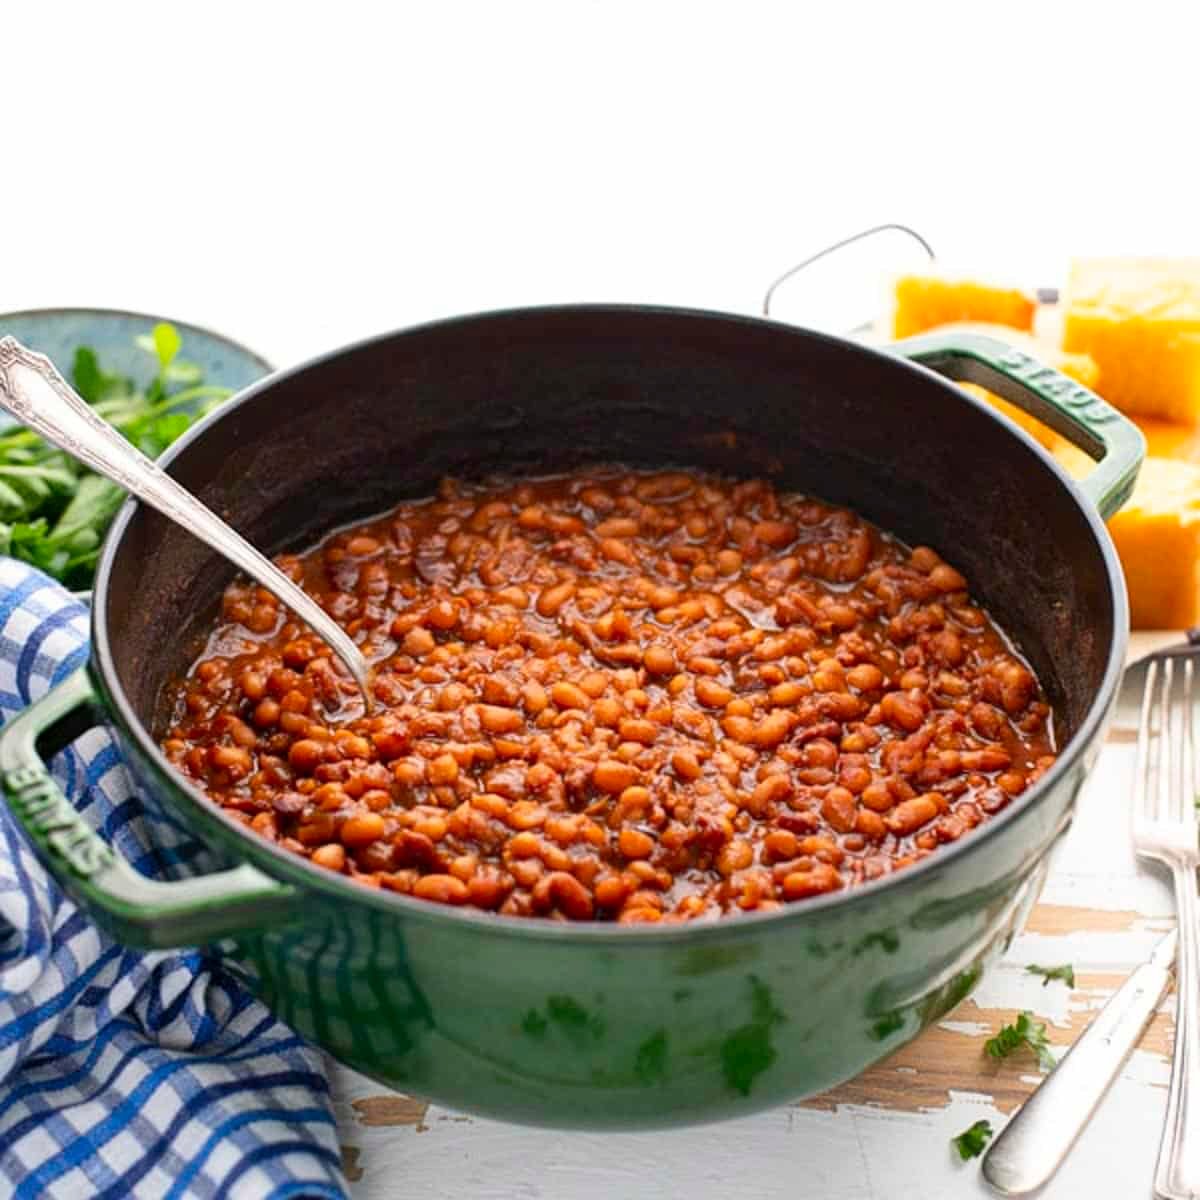 Square side shot of a pot of old fashioned homemade baked beans recipe.